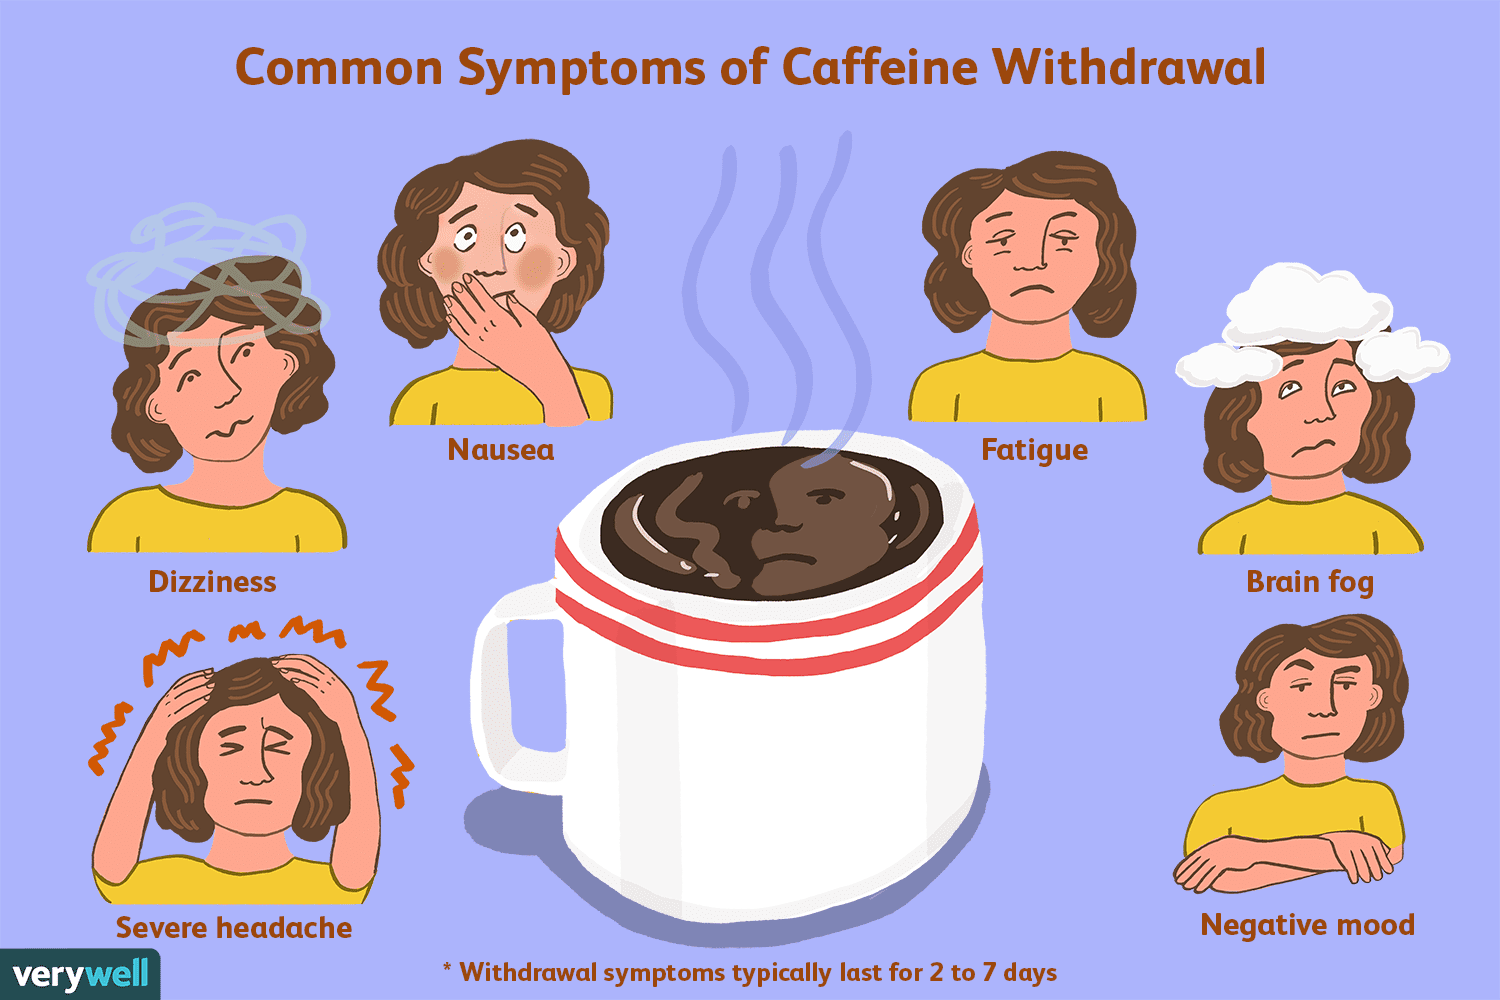 Can Caffeine Withdrawal Cause Back Pain?